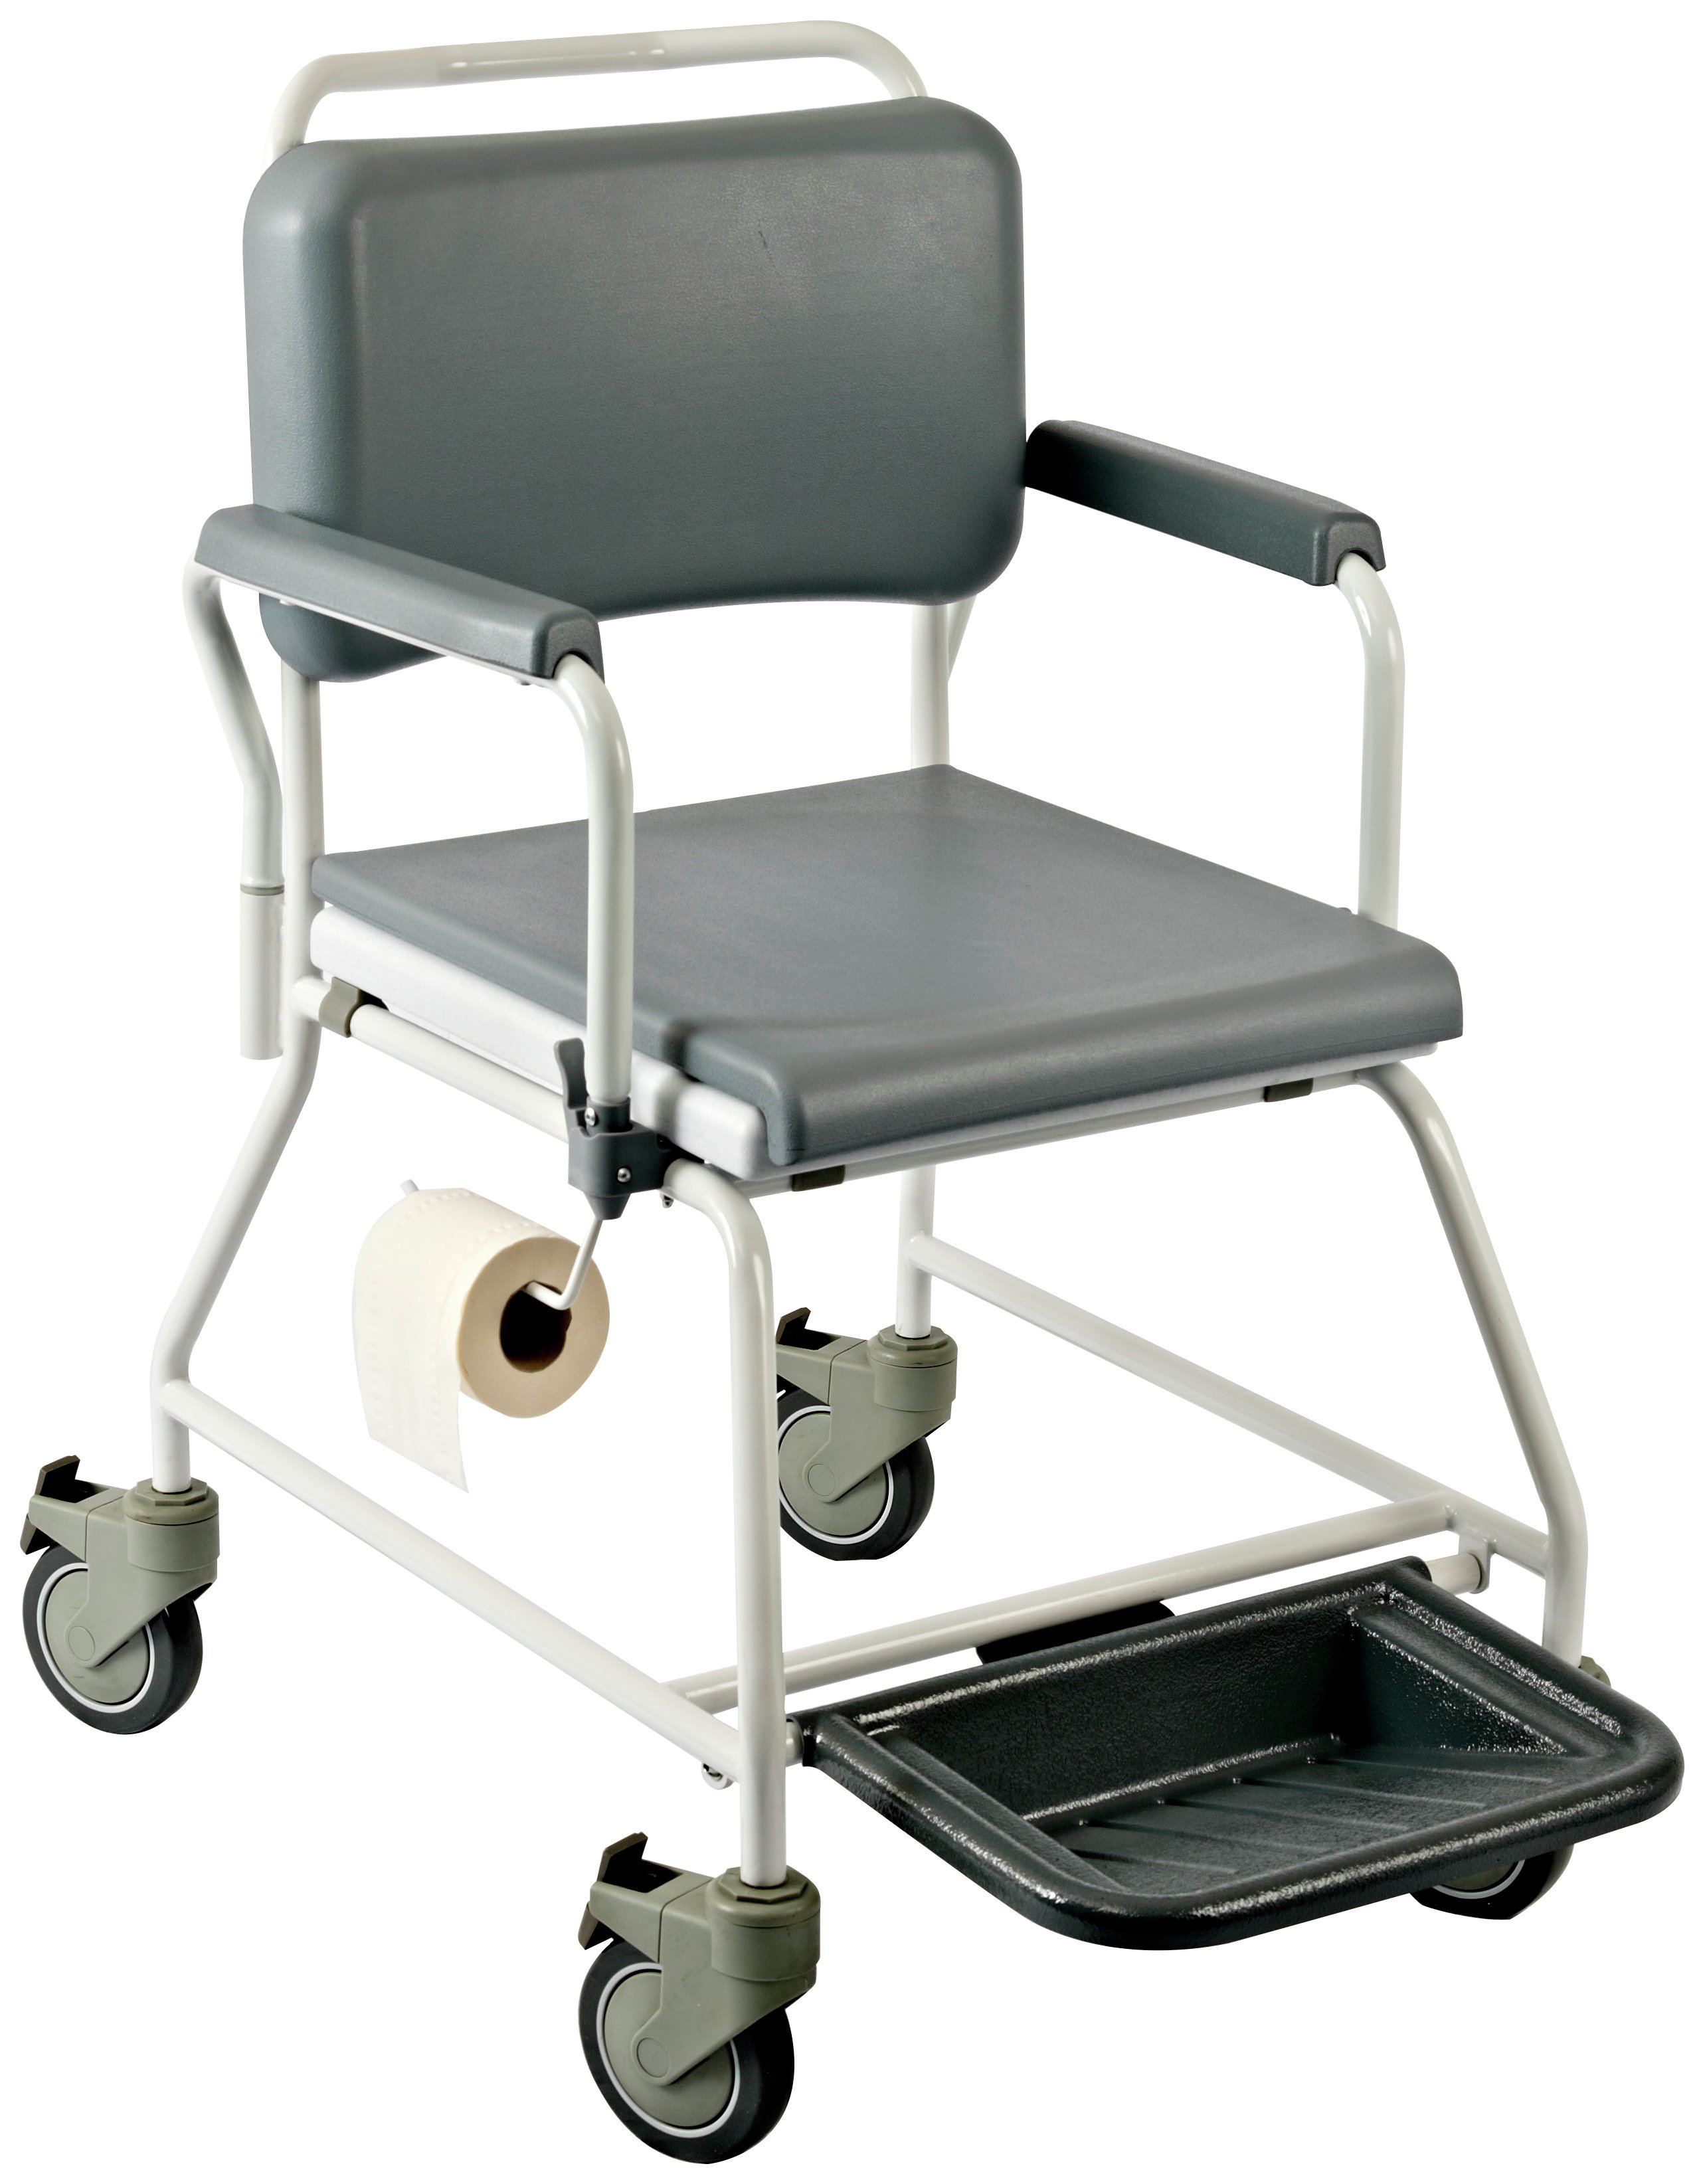 NRS Shower Commode Chair. Review